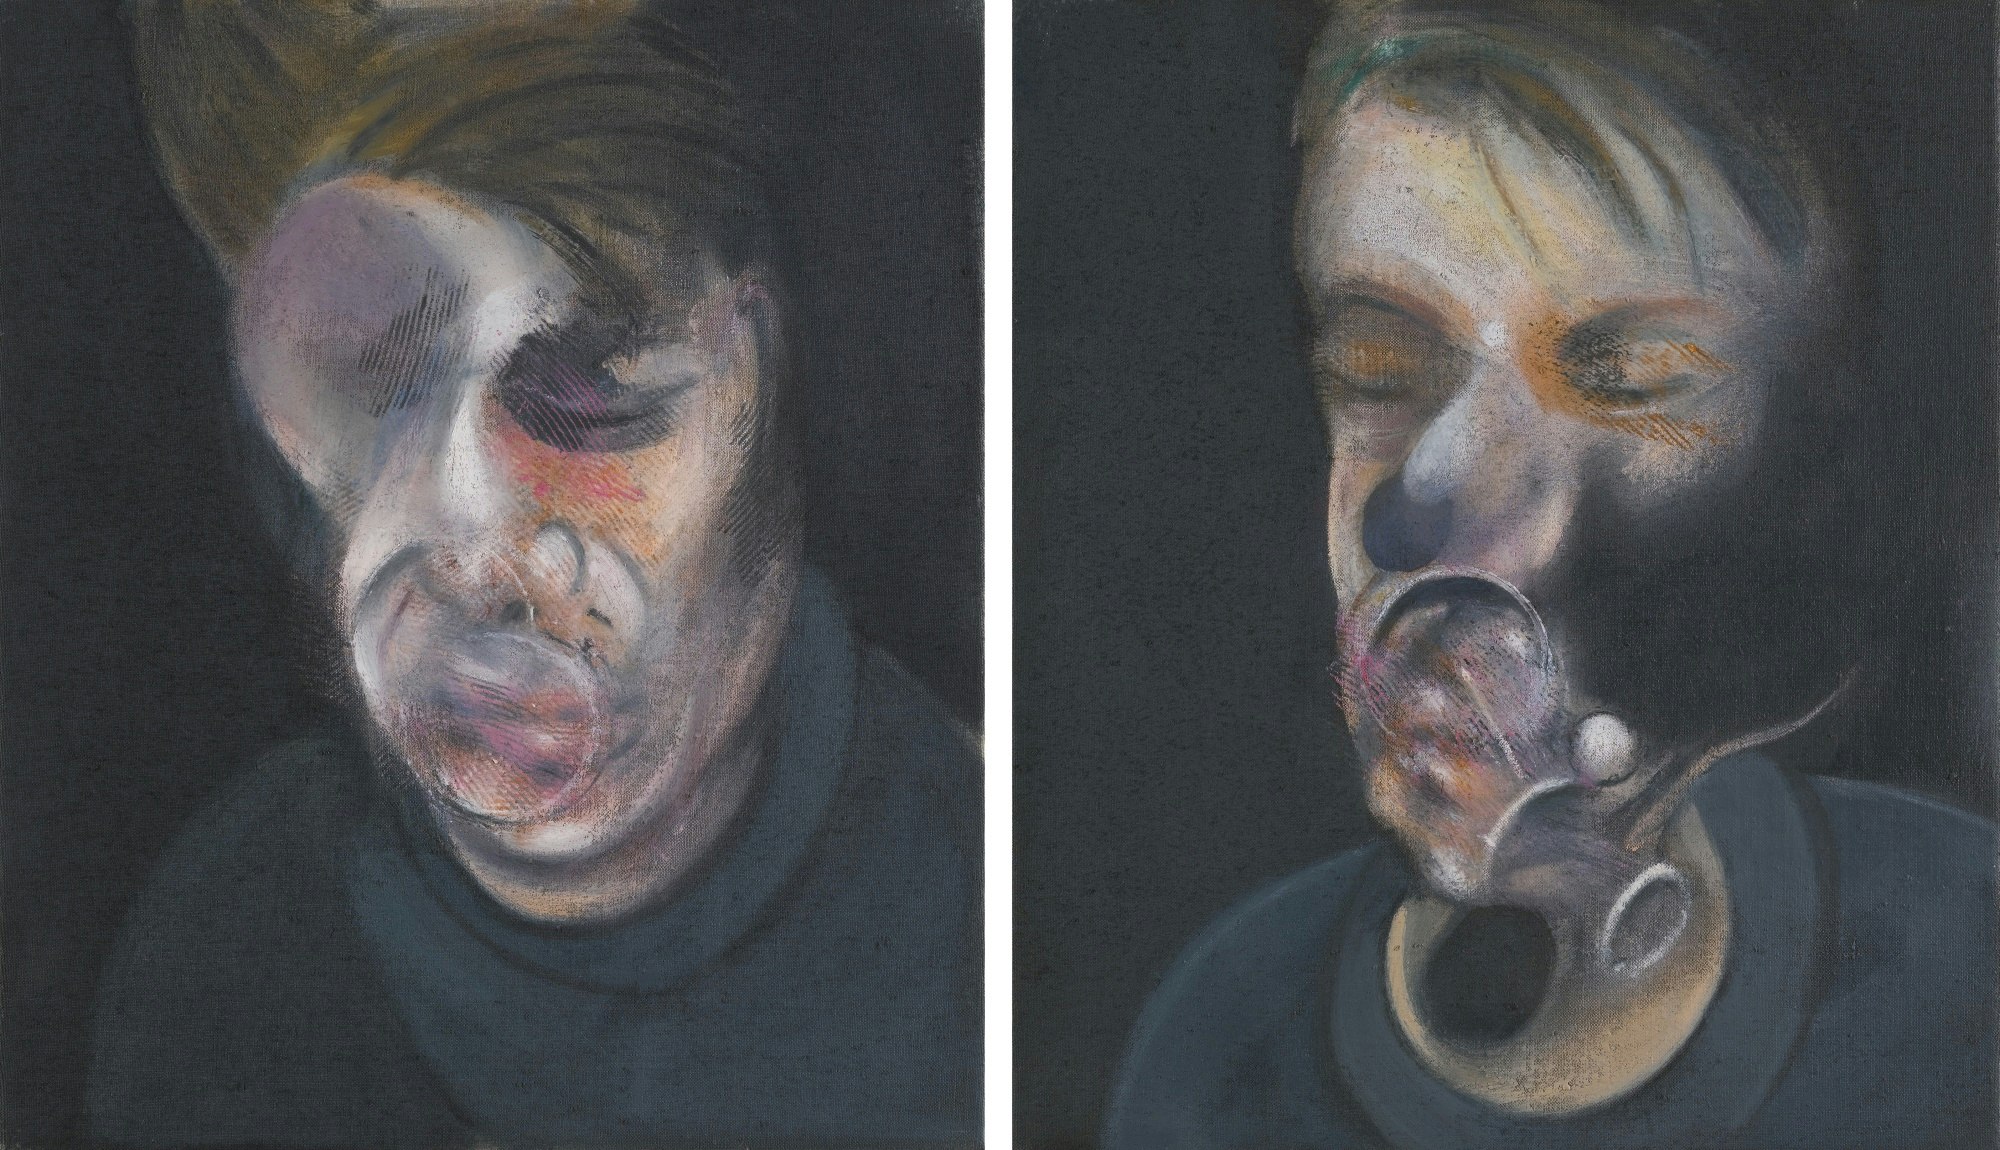 Francis Bacons "Two Studies for a Self-Portrait", 1977. Foto: Sotheby's.